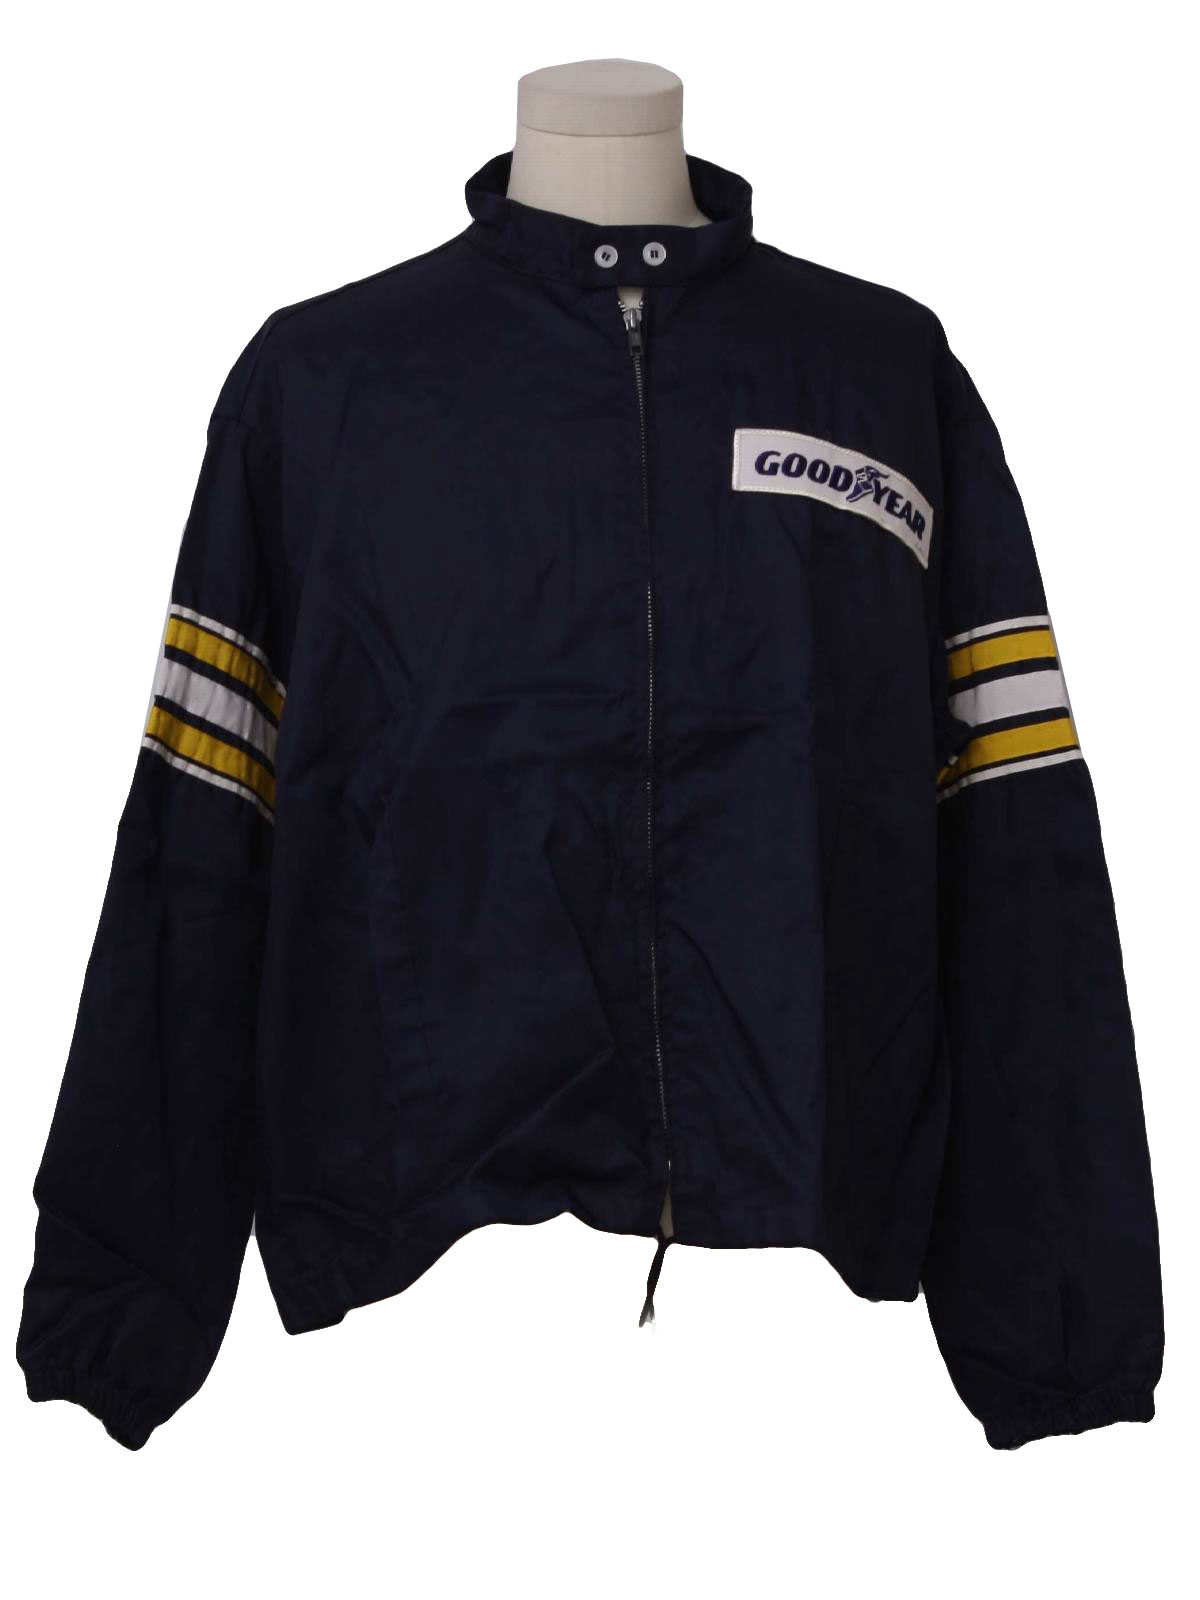 80s Jacket (Goodyear): 80s -Goodyear- Mens midnight blue, gold and ...